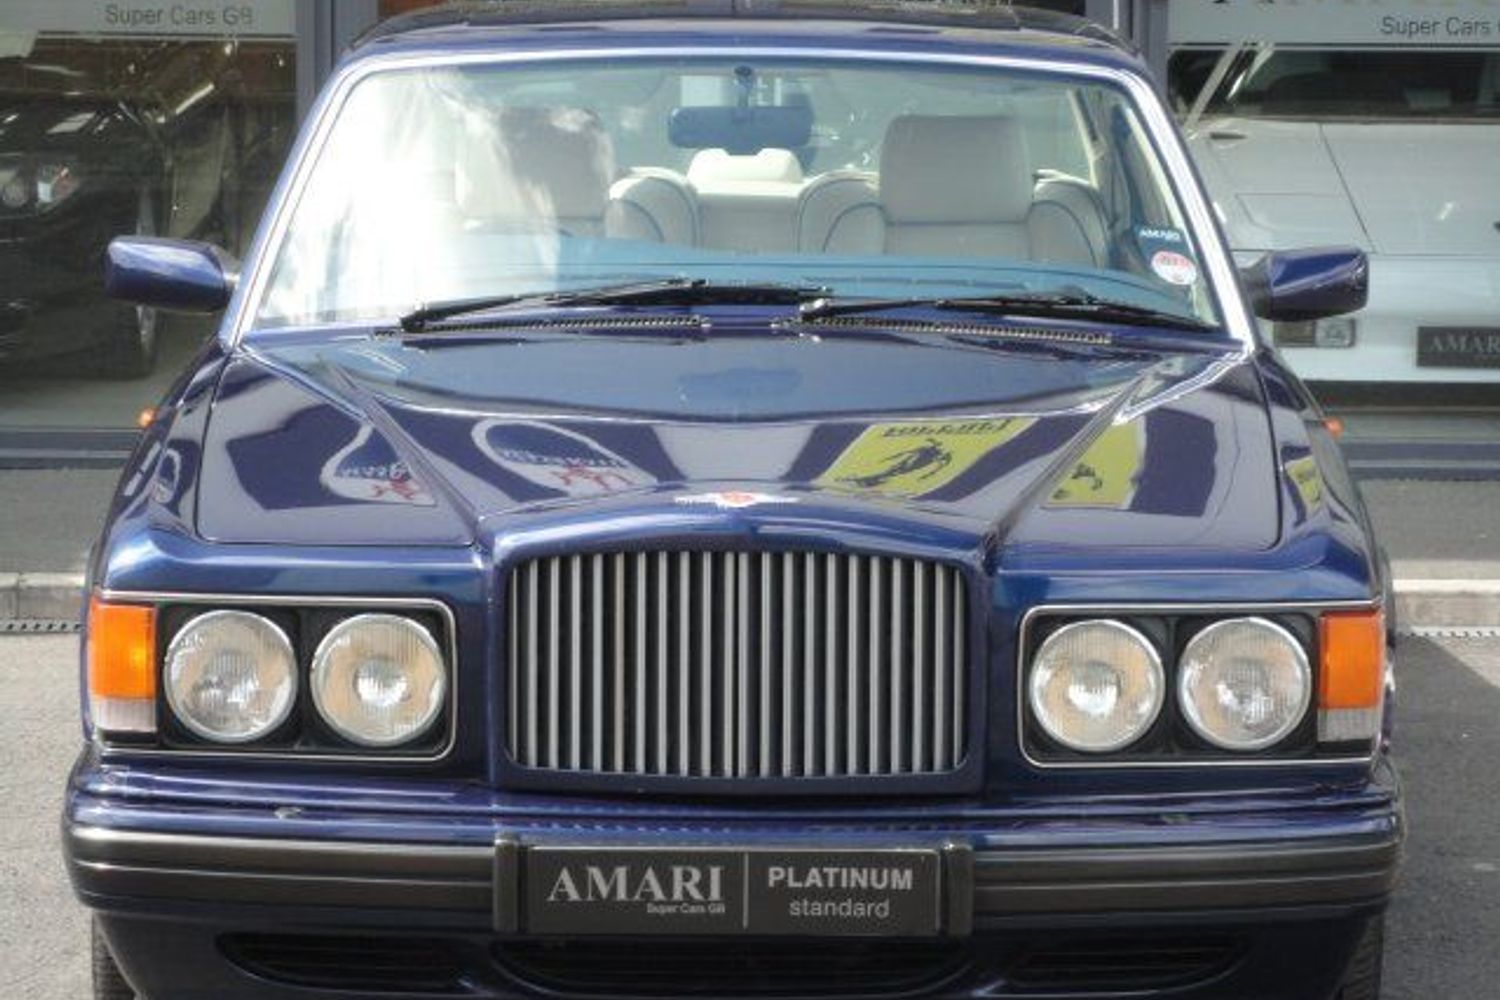 BENTLEY TURBO R ""ONLY 58,000 MILES""